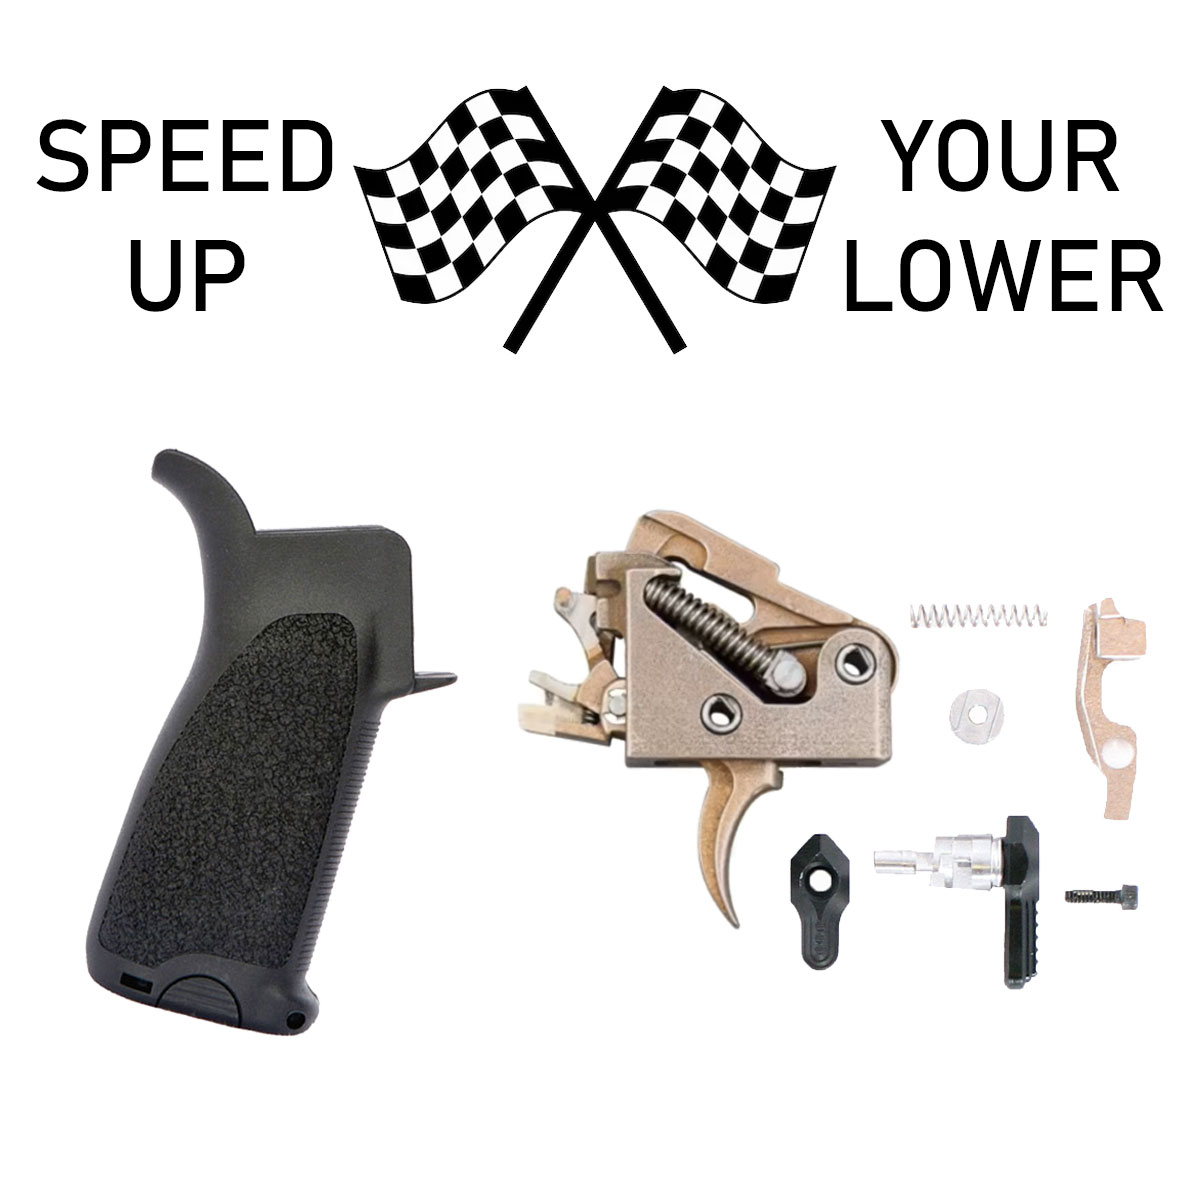 Speed Up Your Lower Kits